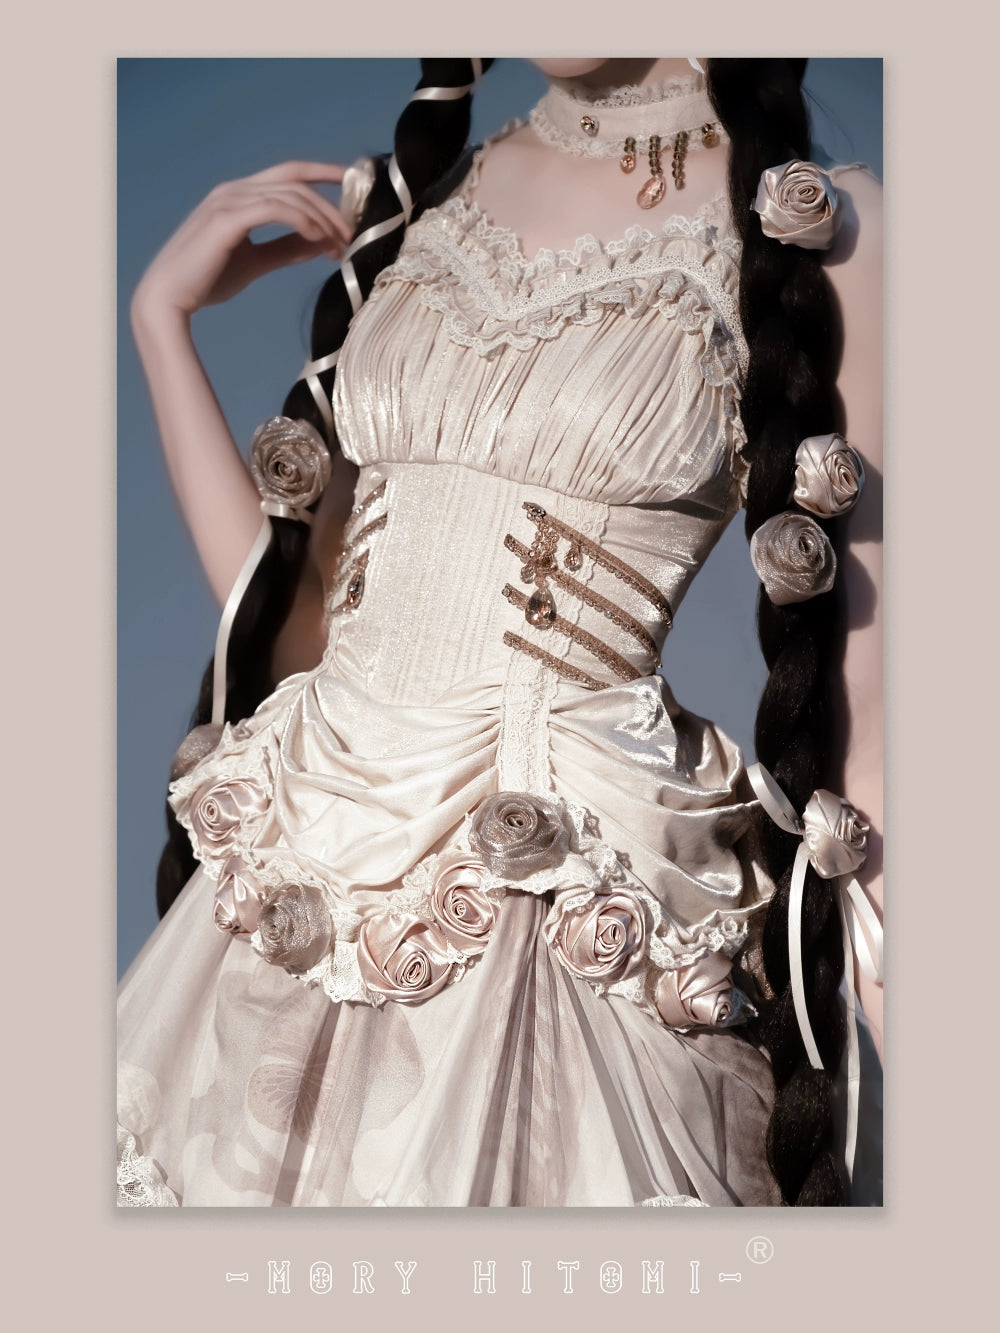 [Sale period ended] Rose Knight III Satin and organdy gothic dress [Champagne]